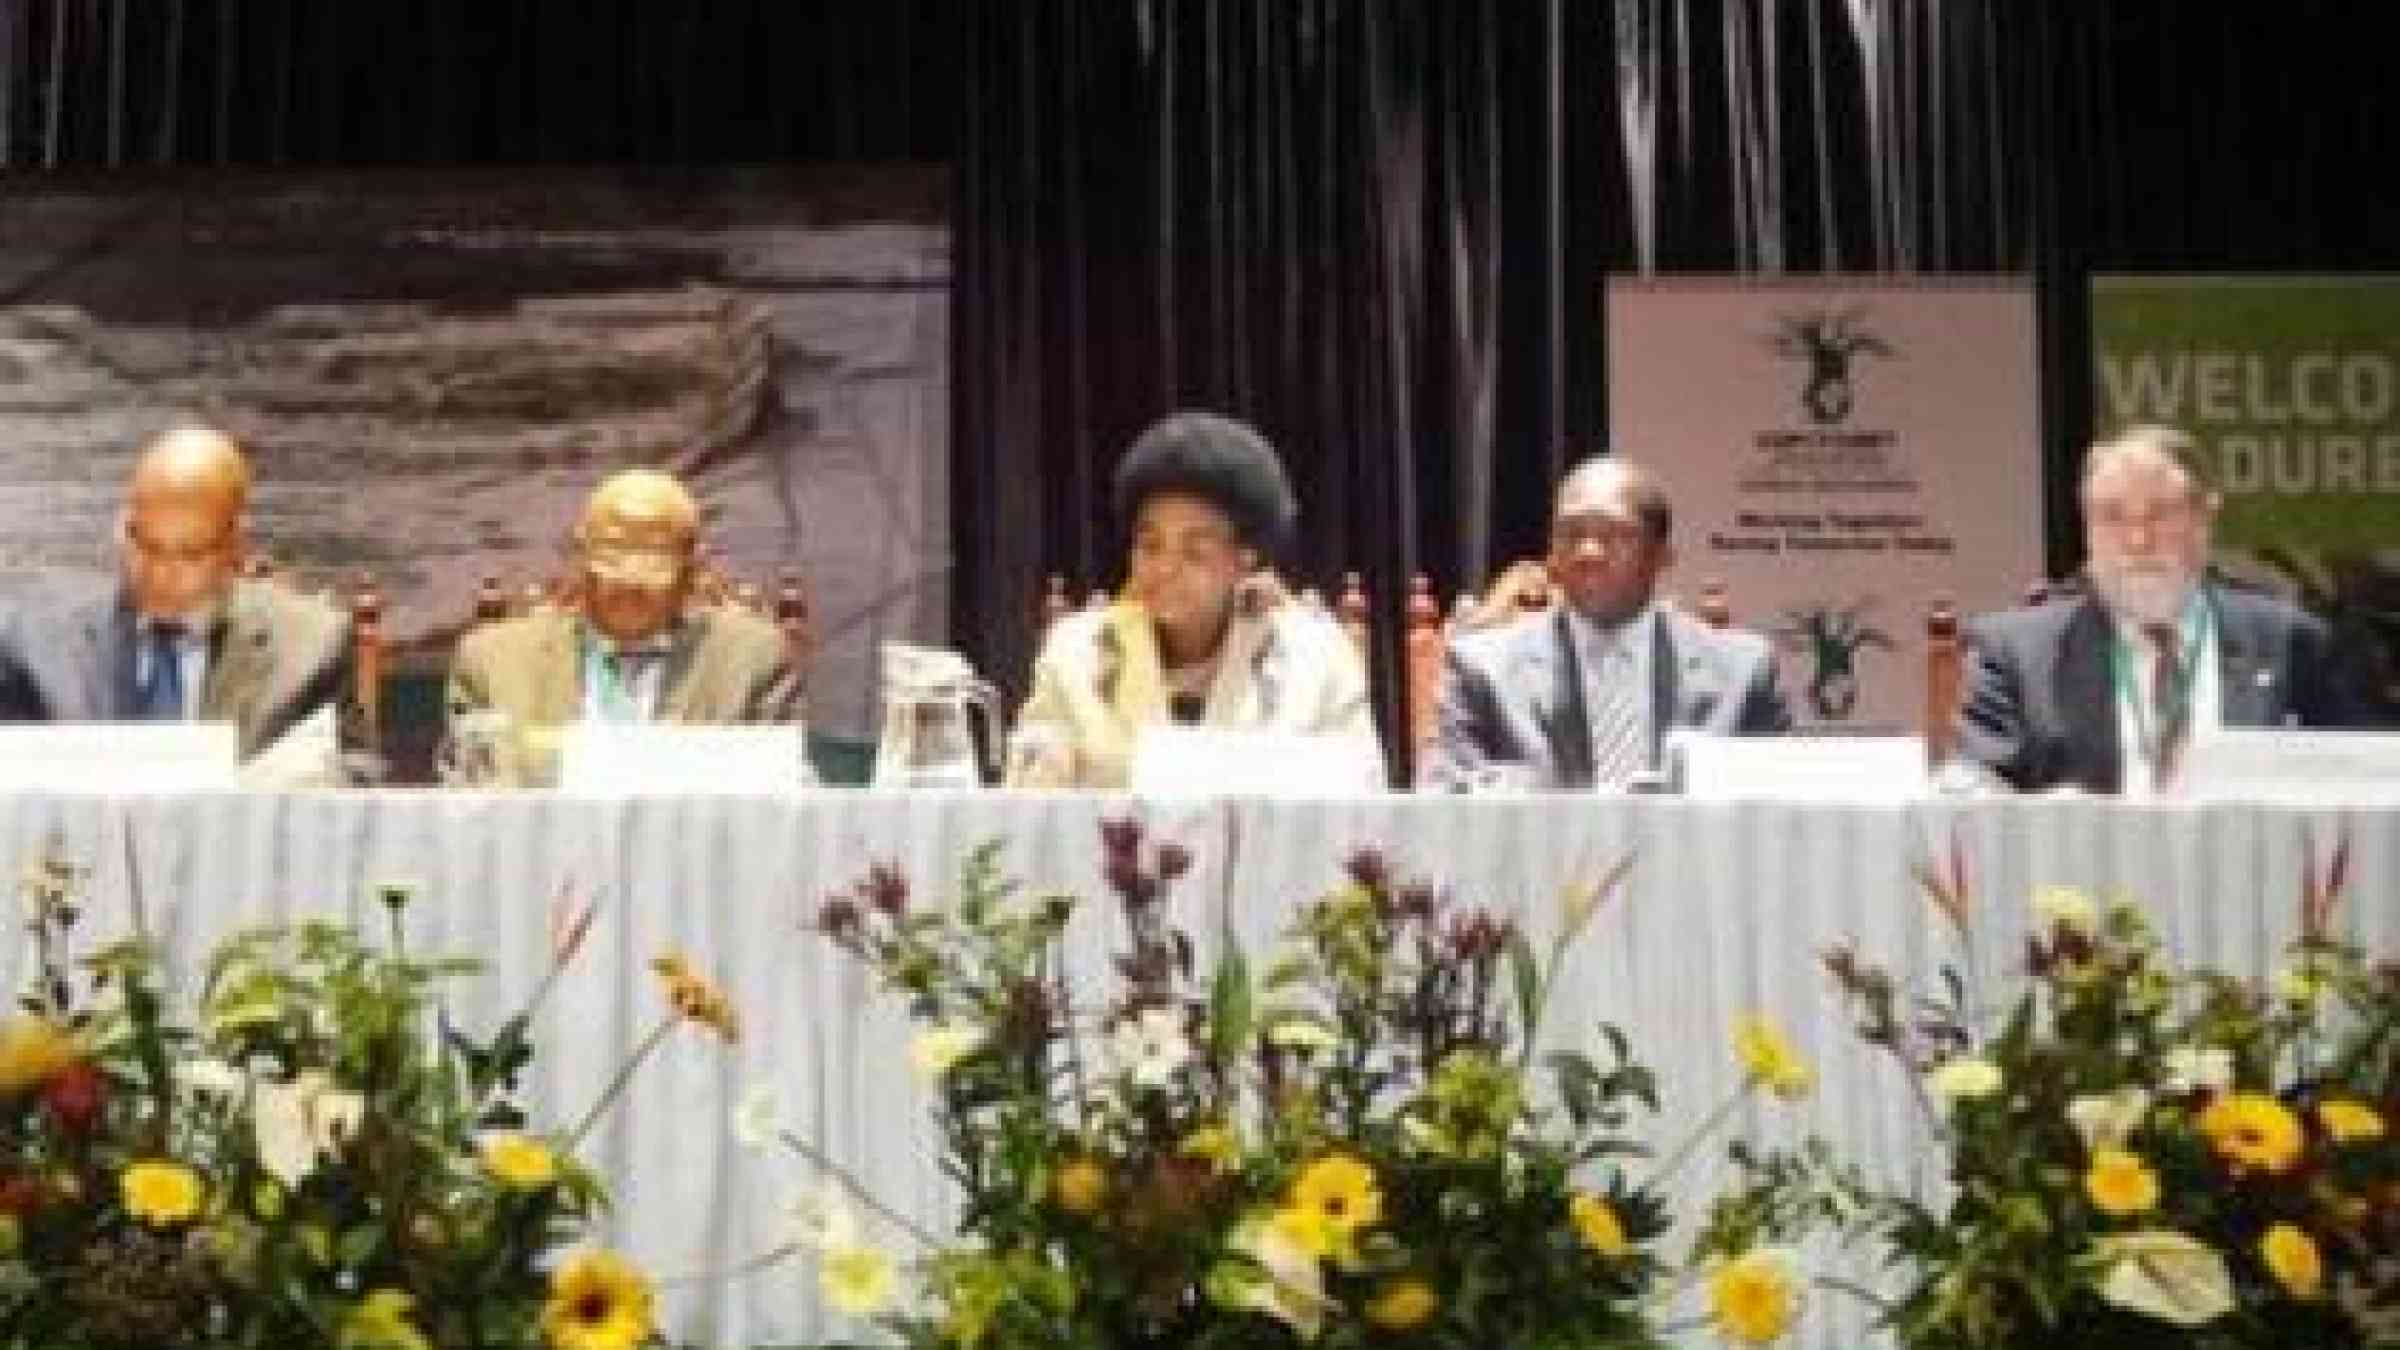 From left: South Africa President Jacob Zuma; Manguang, South Africa mayor Thabo Manyoni; COP17 President and South African environment minister Edna Molewa; Durban mayor James Nxumalo; ICLEI president David Cadman